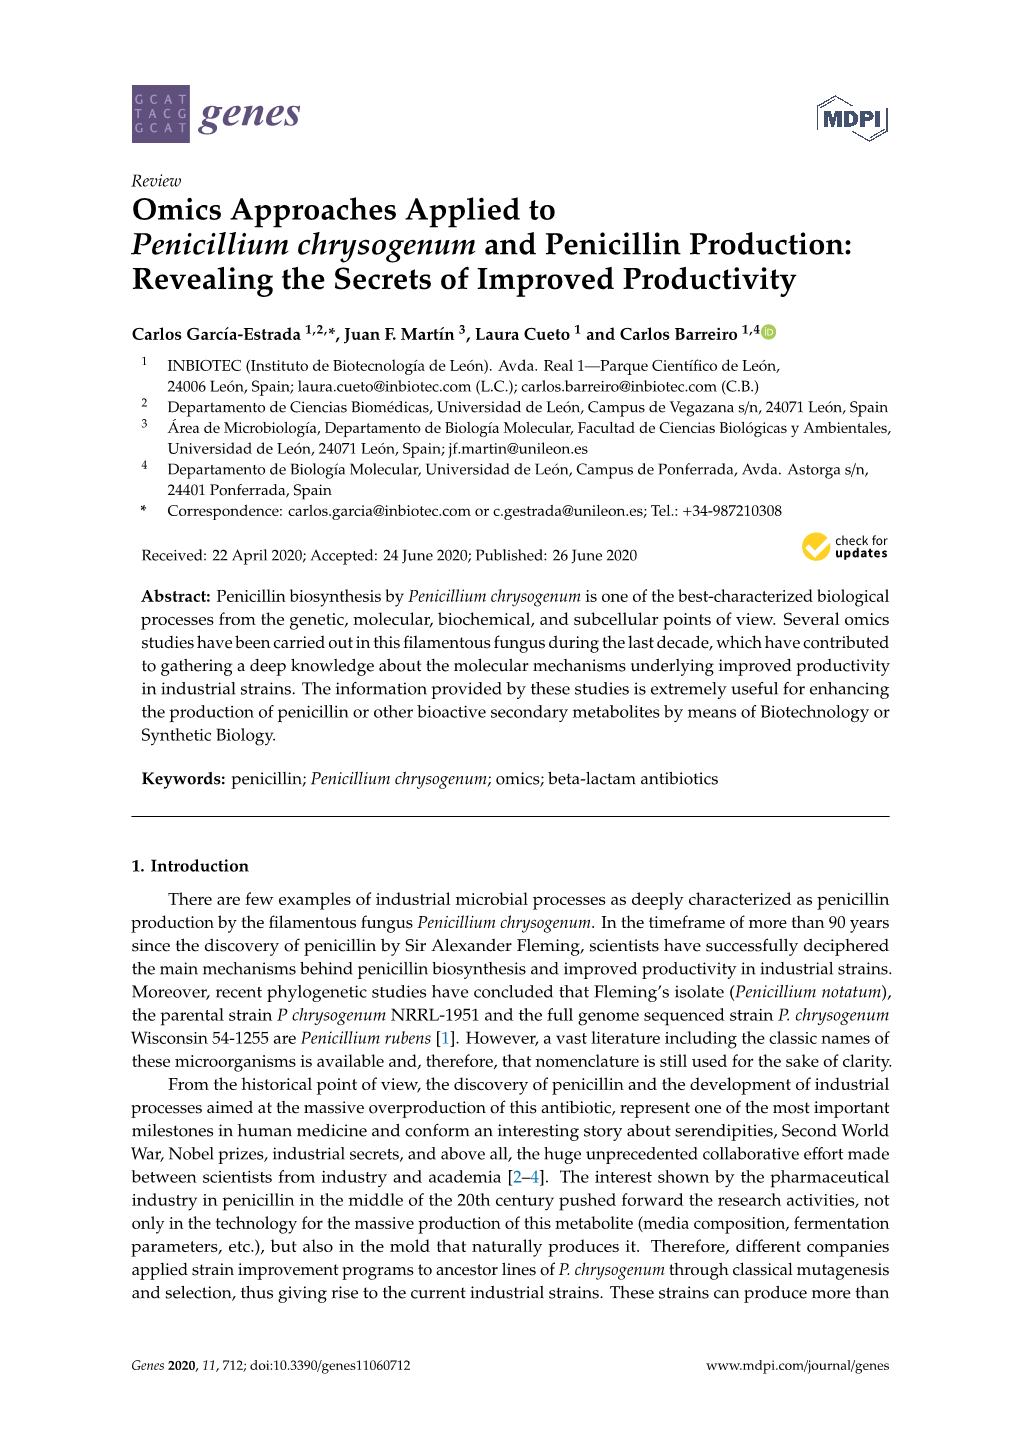 Omics Approaches Applied to Penicillium Chrysogenum and Penicillin Production: Revealing the Secrets of Improved Productivity